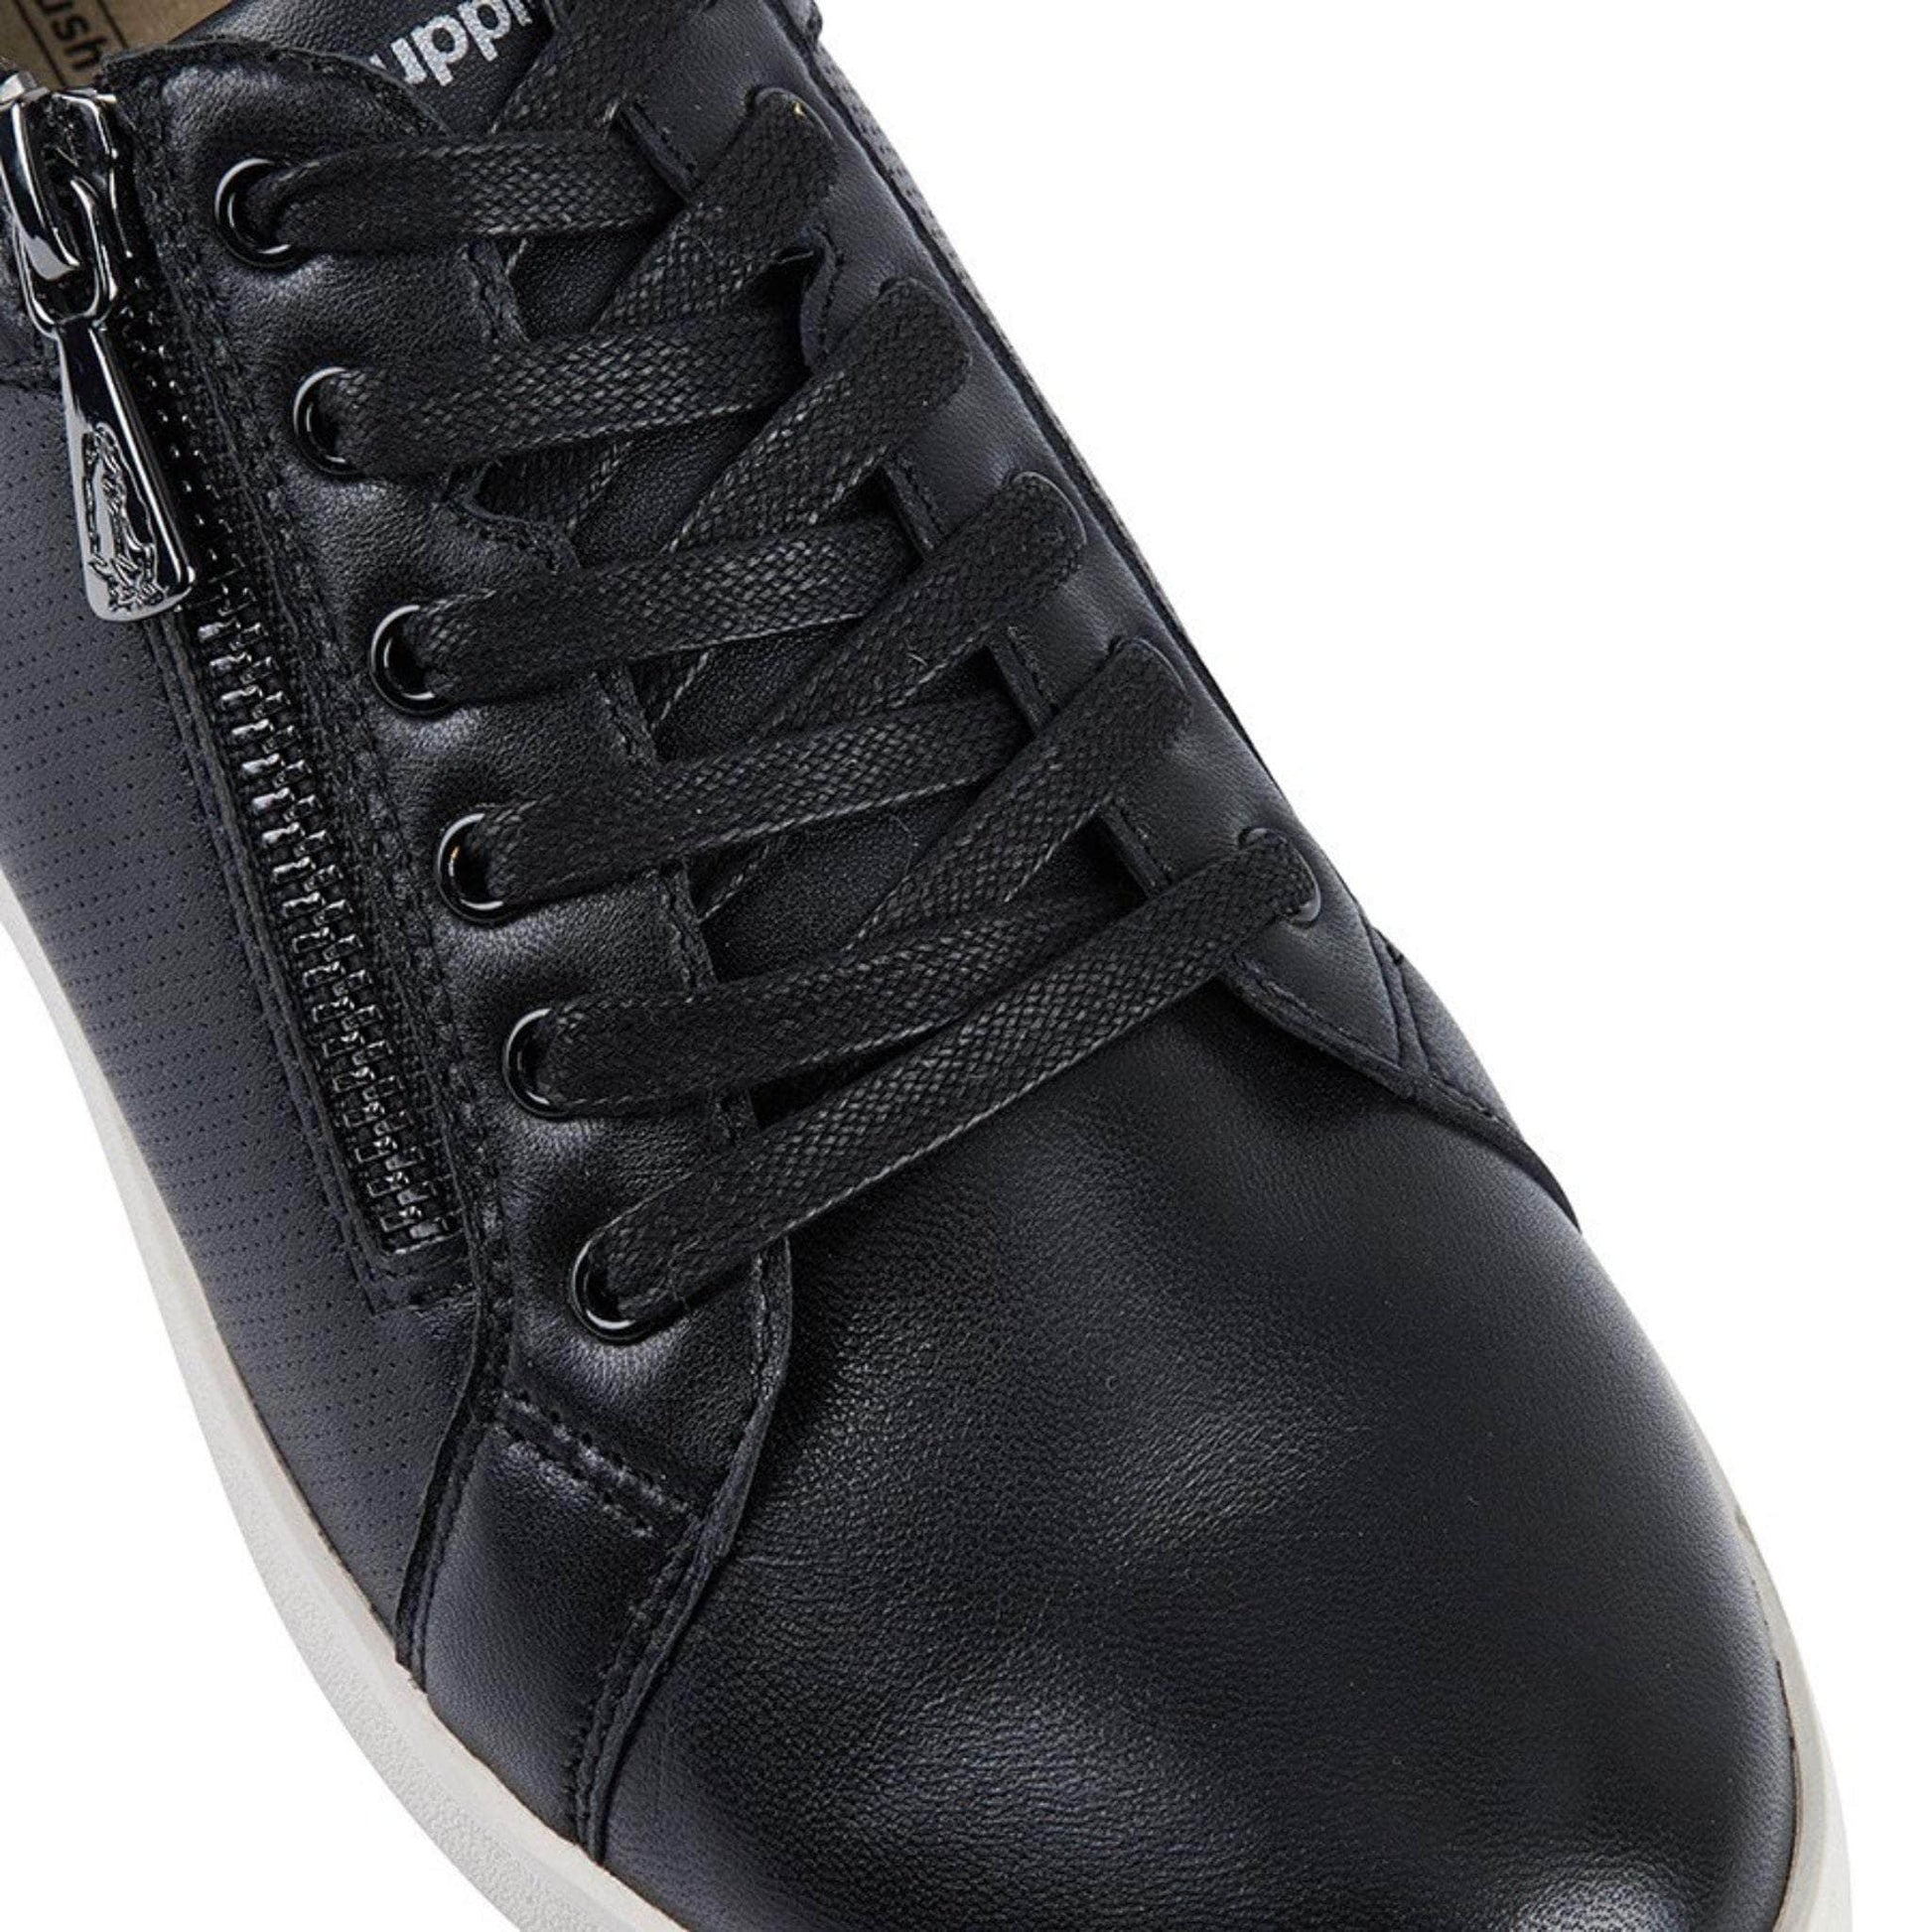 SHOES Hush Puppies Mimosa Sneaker - Caring Clothing